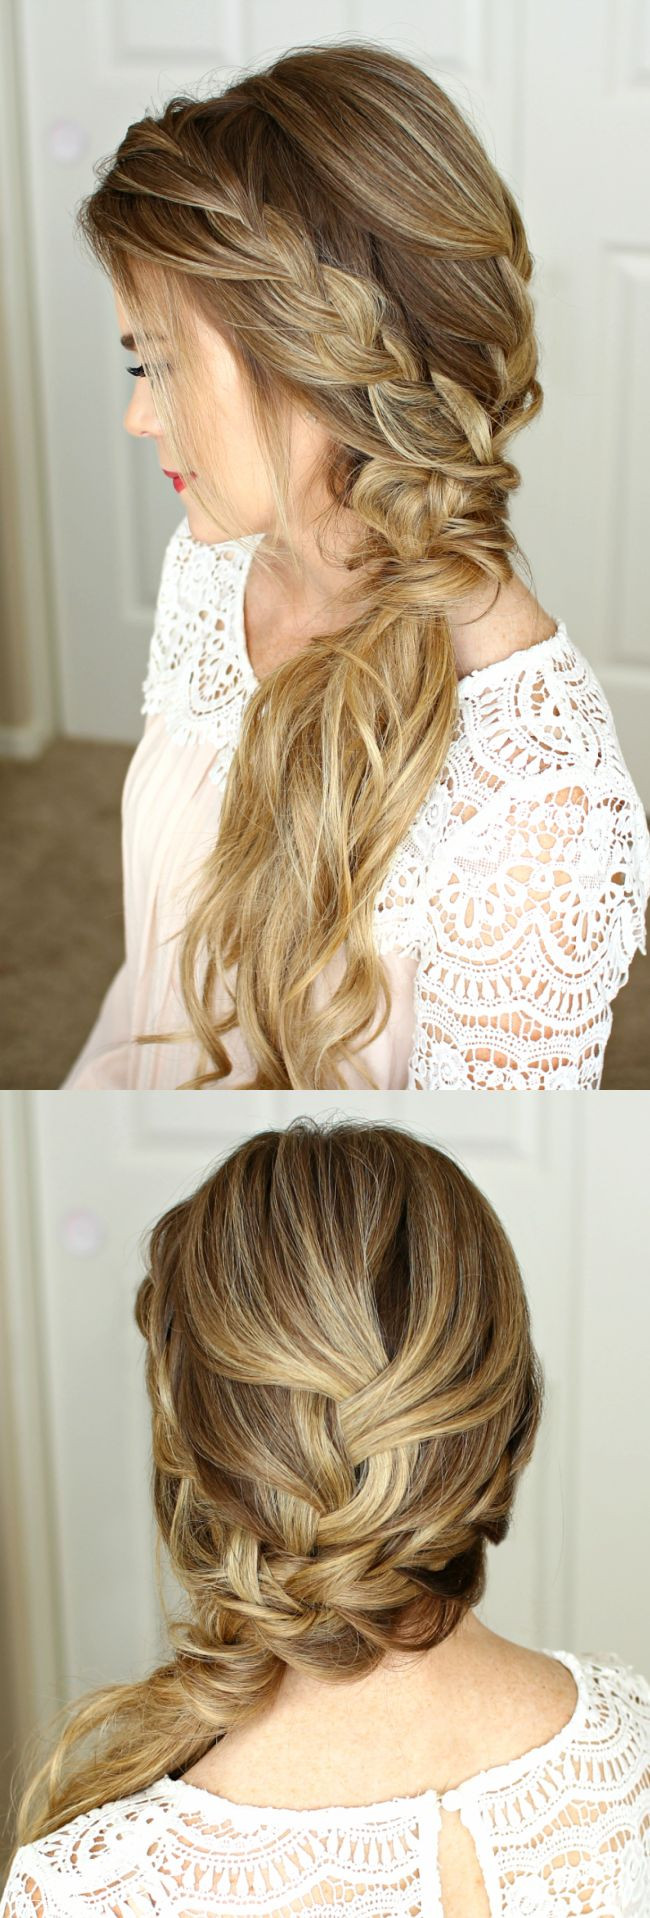 Simple Hairstyles For Prom
 Best 25 Prom hairstyles ideas on Pinterest